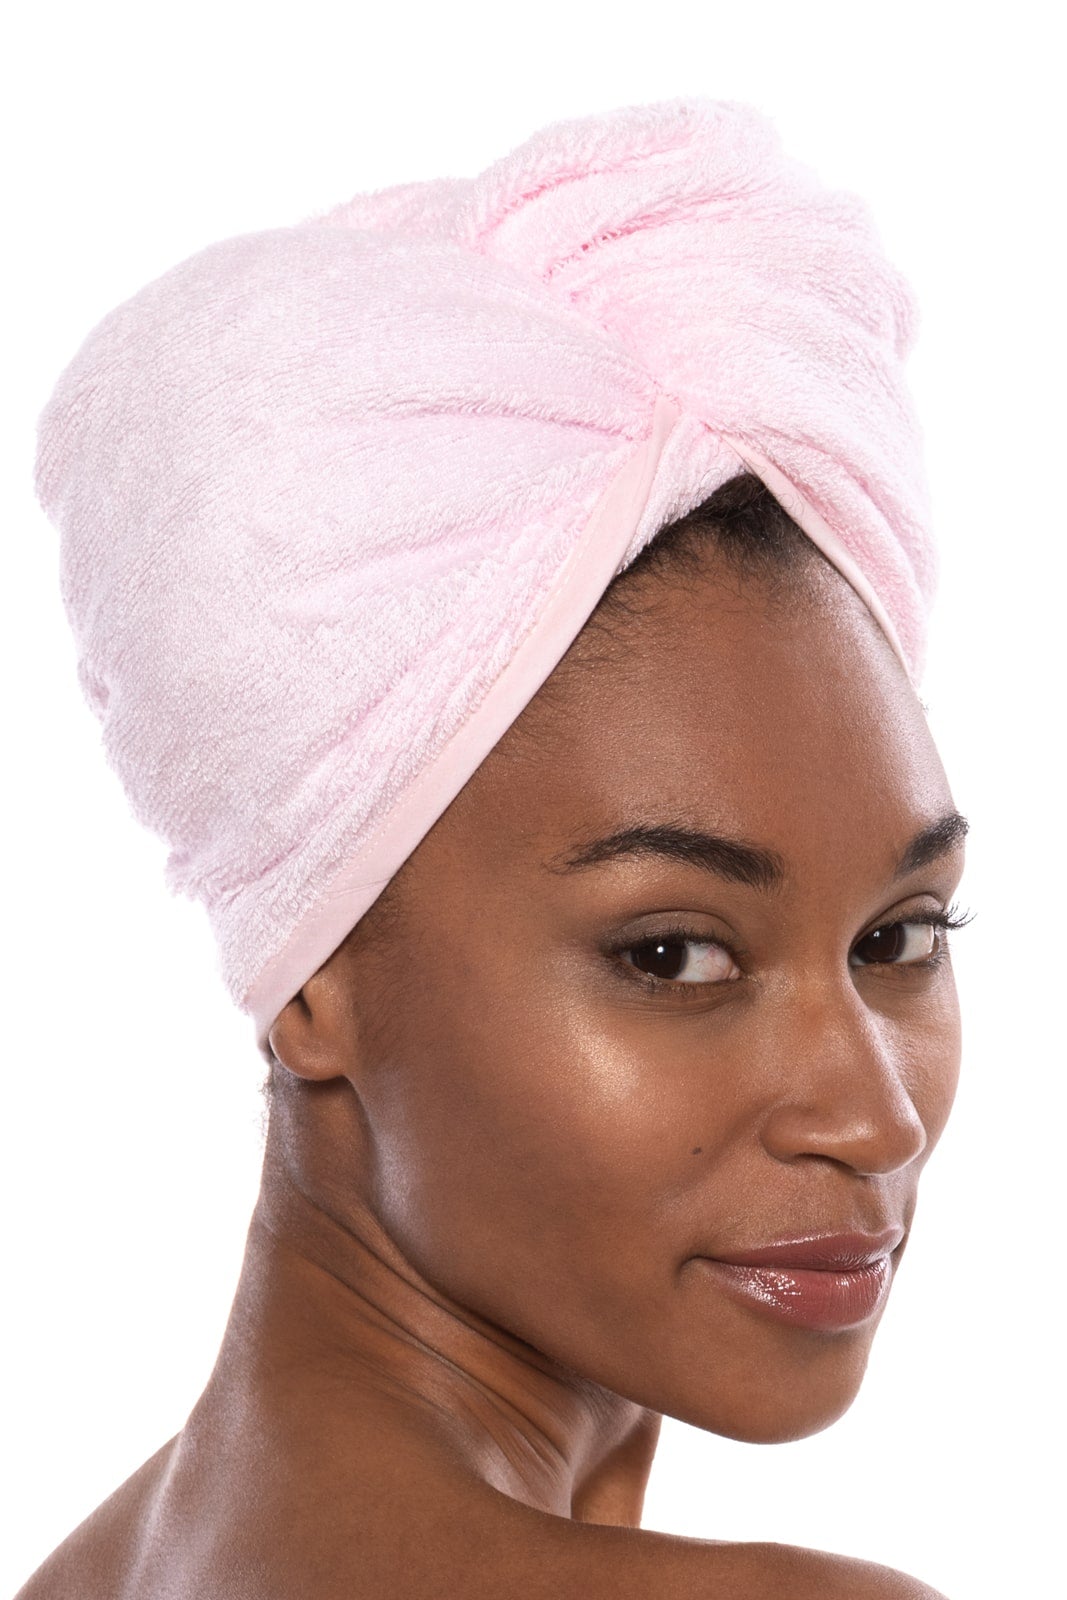 Texere Women's Terry Cloth Hair Towel / Wrap Womens>Spa>Hair Towel Fishers Finery Barely Pink 